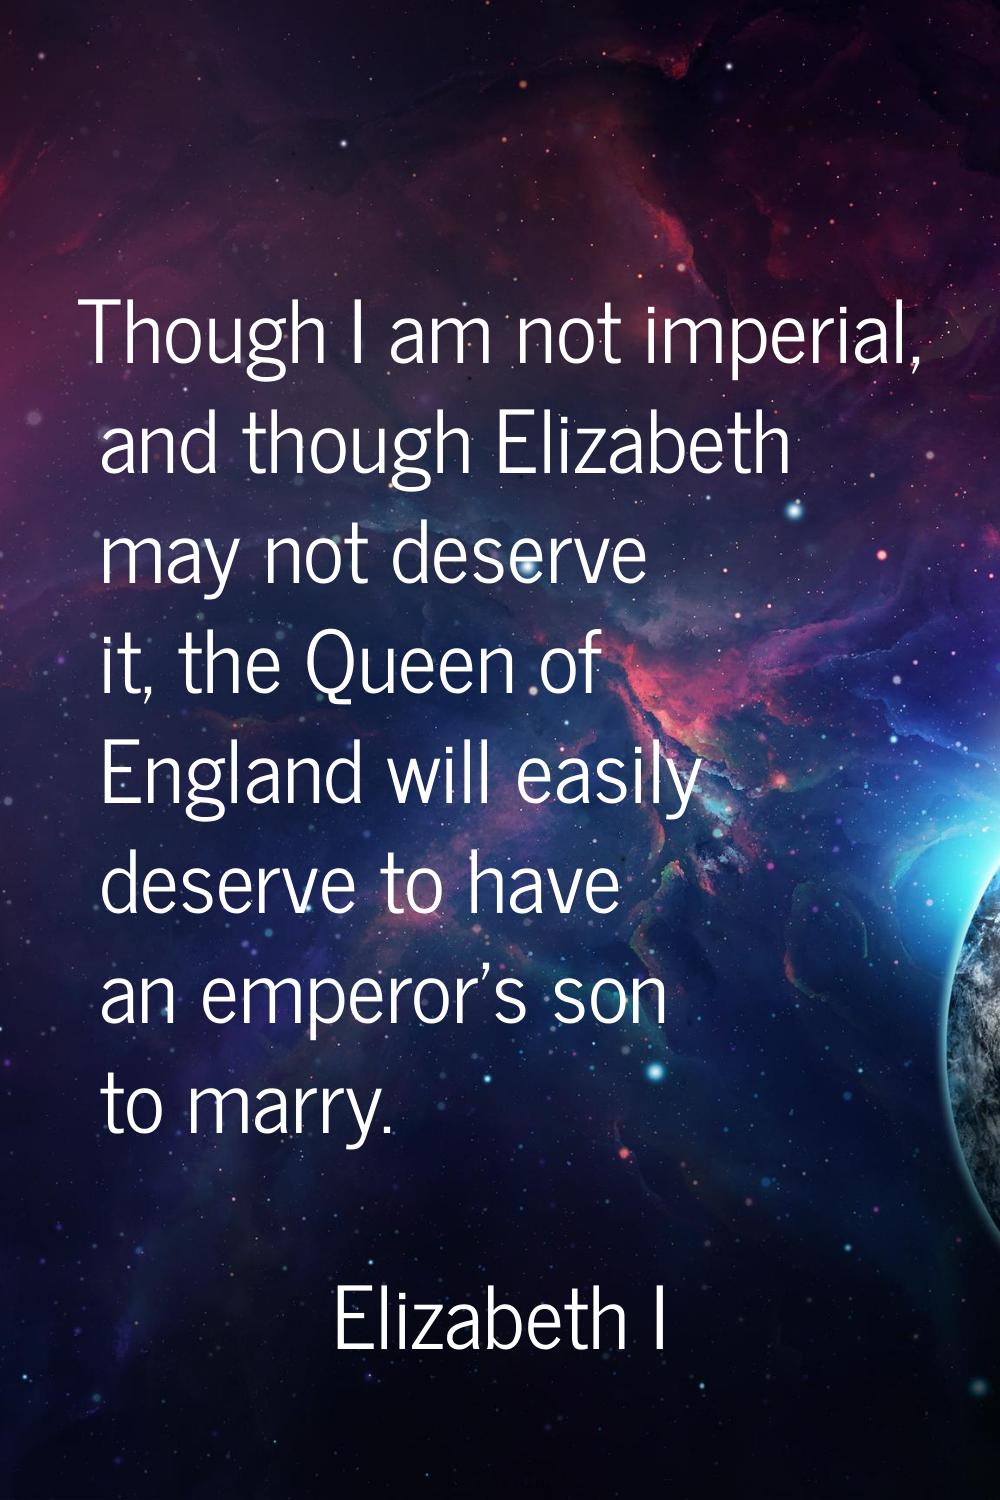 Though I am not imperial, and though Elizabeth may not deserve it, the Queen of England will easily